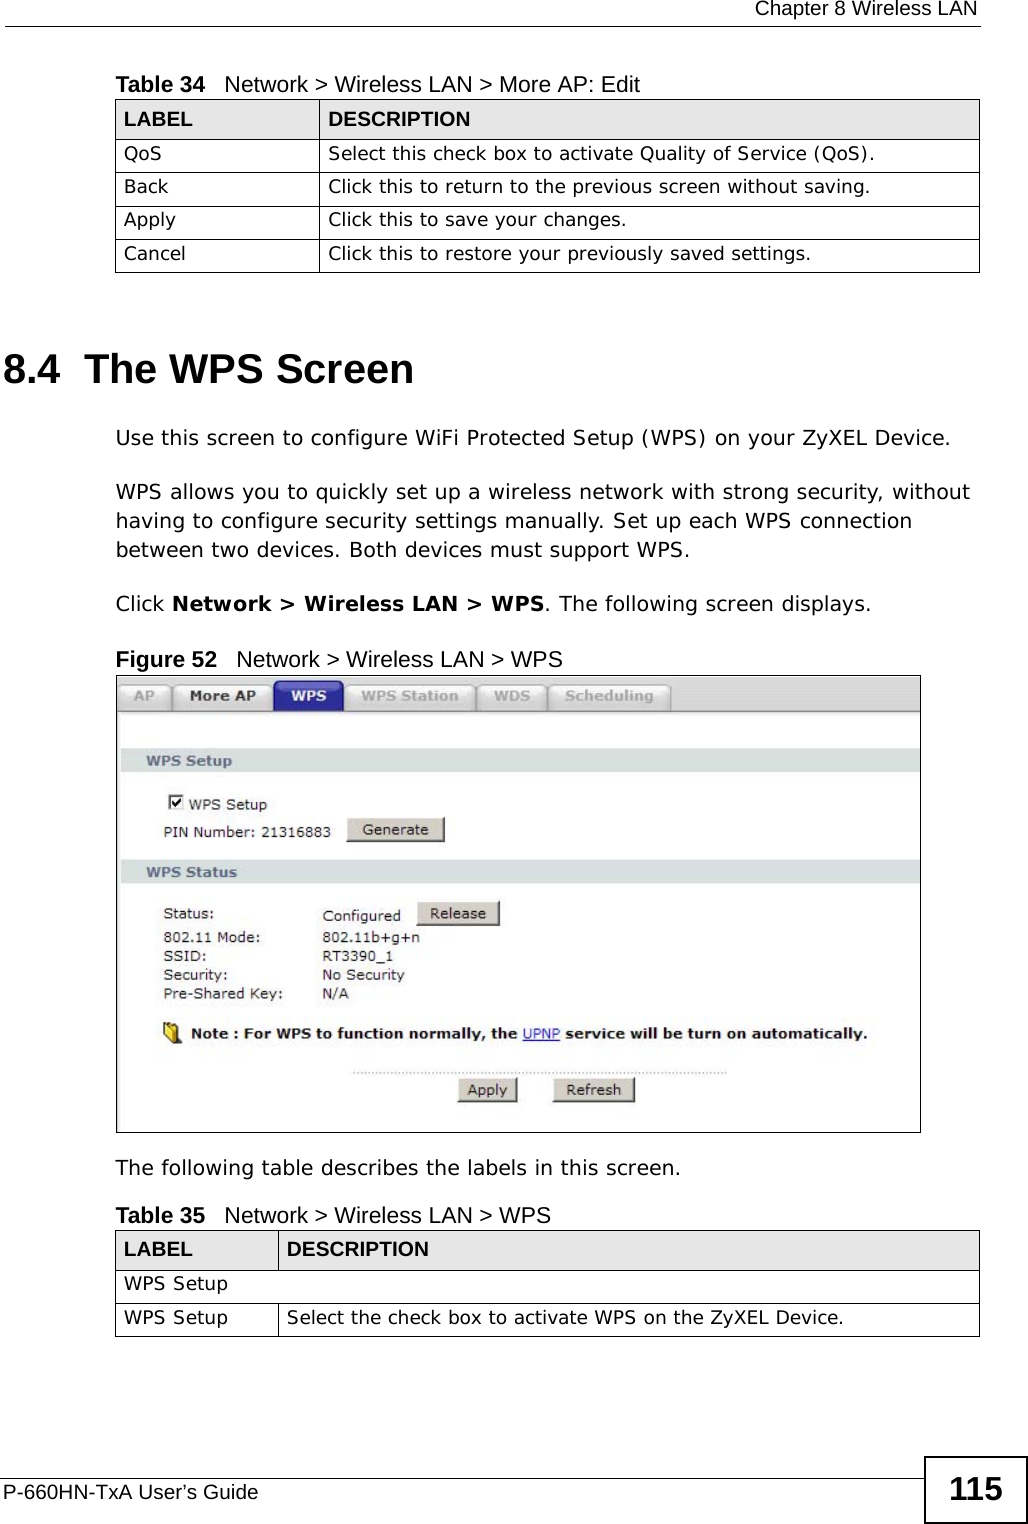  Chapter 8 Wireless LANP-660HN-TxA User’s Guide 1158.4  The WPS ScreenUse this screen to configure WiFi Protected Setup (WPS) on your ZyXEL Device.WPS allows you to quickly set up a wireless network with strong security, without having to configure security settings manually. Set up each WPS connection between two devices. Both devices must support WPS.Click Network &gt; Wireless LAN &gt; WPS. The following screen displays.Figure 52   Network &gt; Wireless LAN &gt; WPSThe following table describes the labels in this screen.QoS Select this check box to activate Quality of Service (QoS).Back Click this to return to the previous screen without saving.Apply Click this to save your changes.Cancel Click this to restore your previously saved settings.Table 34   Network &gt; Wireless LAN &gt; More AP: EditLABEL DESCRIPTIONTable 35   Network &gt; Wireless LAN &gt; WPSLABEL DESCRIPTIONWPS SetupWPS Setup Select the check box to activate WPS on the ZyXEL Device.